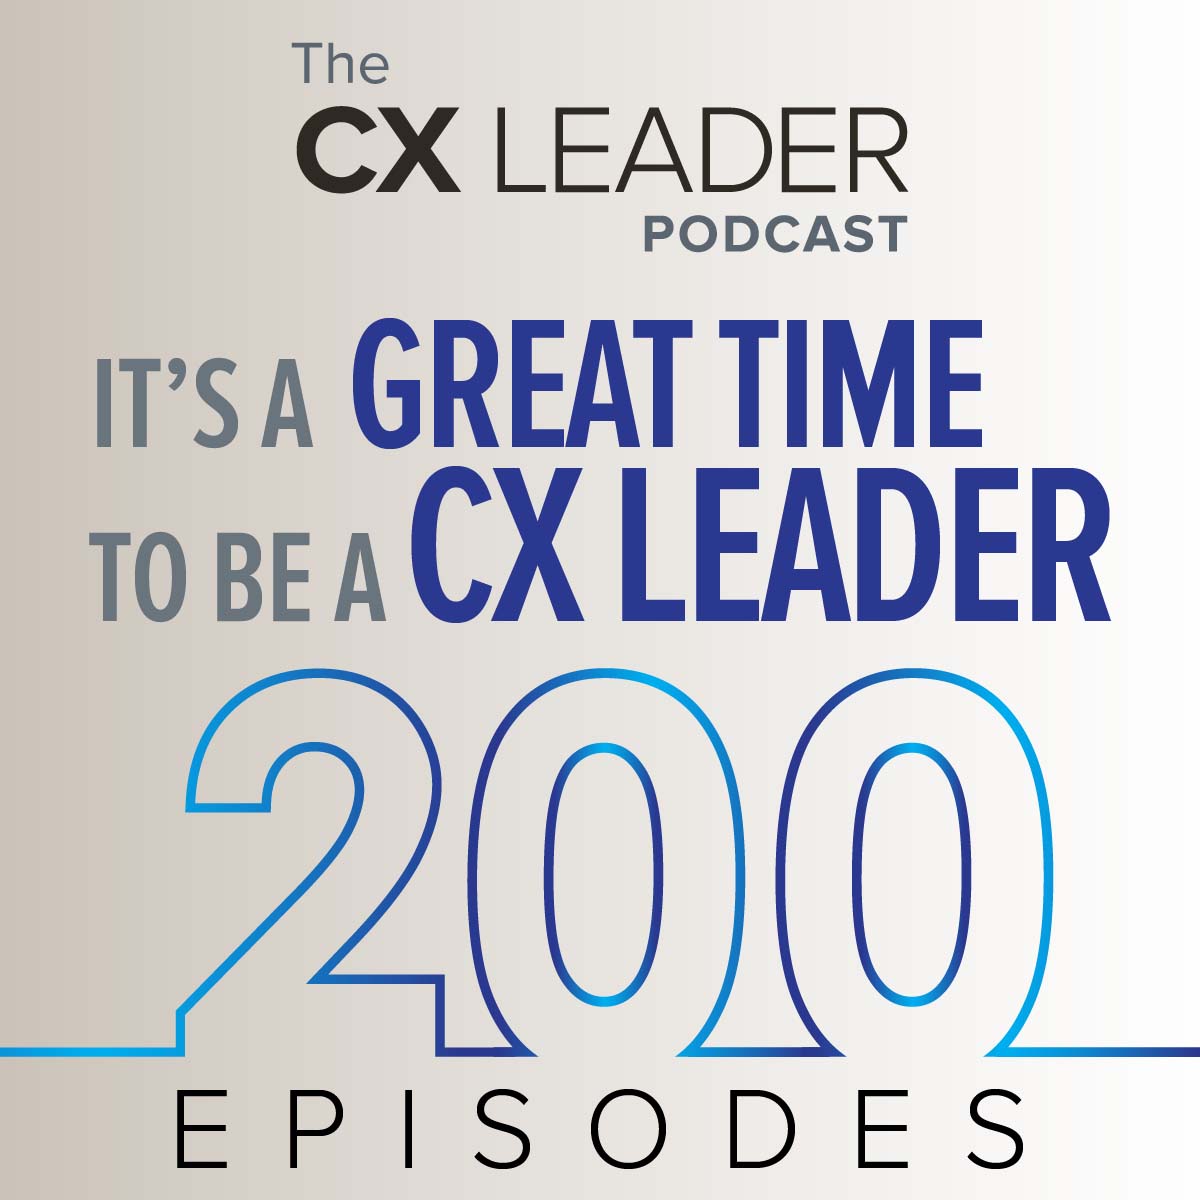 It's a Great Time to be a CX Leader